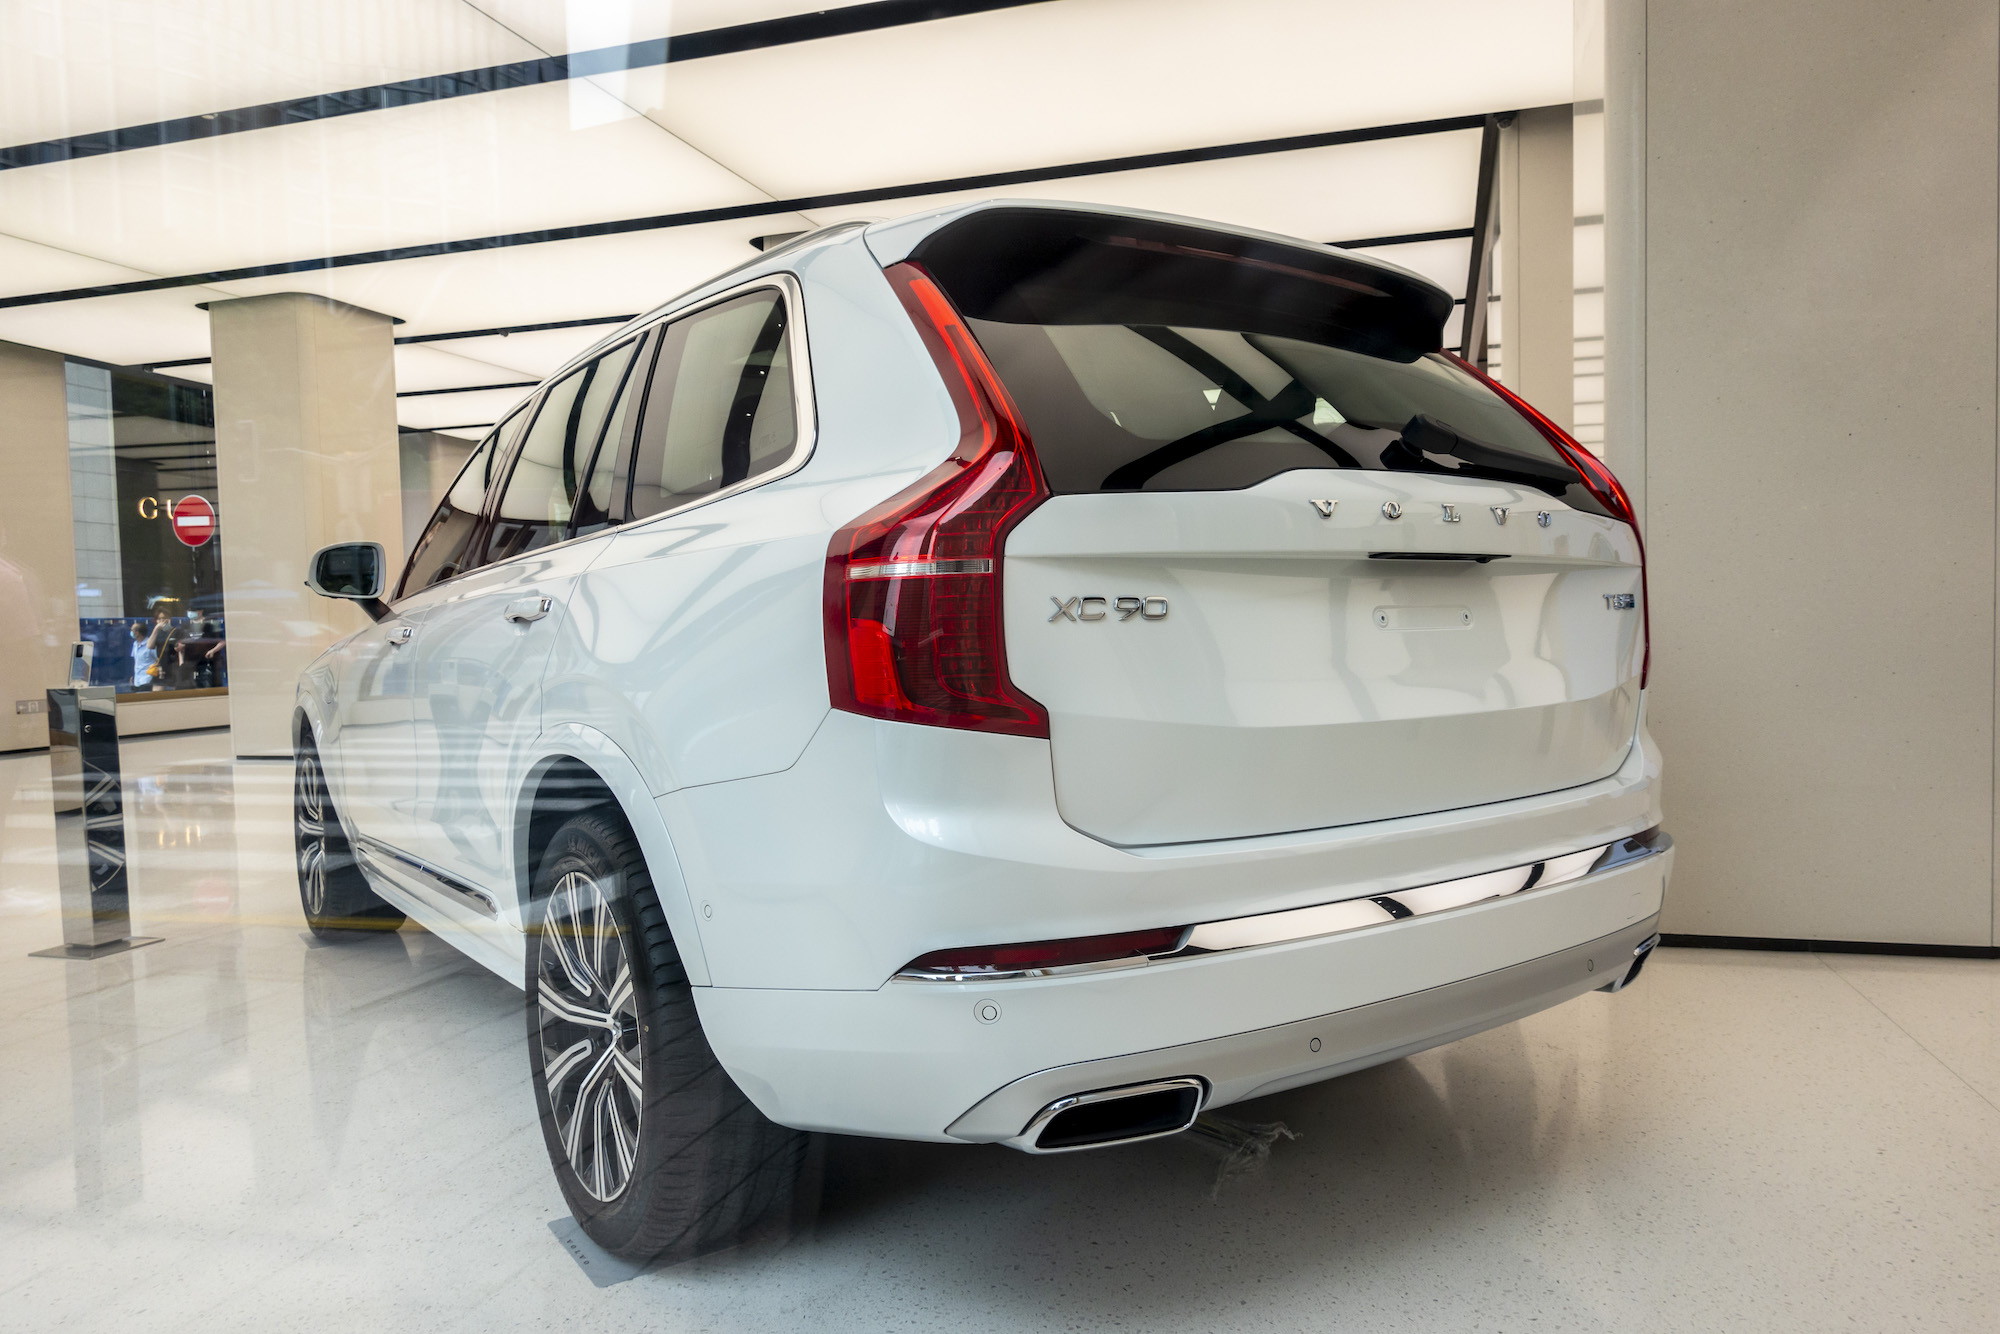 There is a Volvo XC90 car parked in Huawei's flagship store, and Huawei's mobile phone beside it has the word Huawei hicar under it, which is a vehicle intelligent module recently launched by Huawei